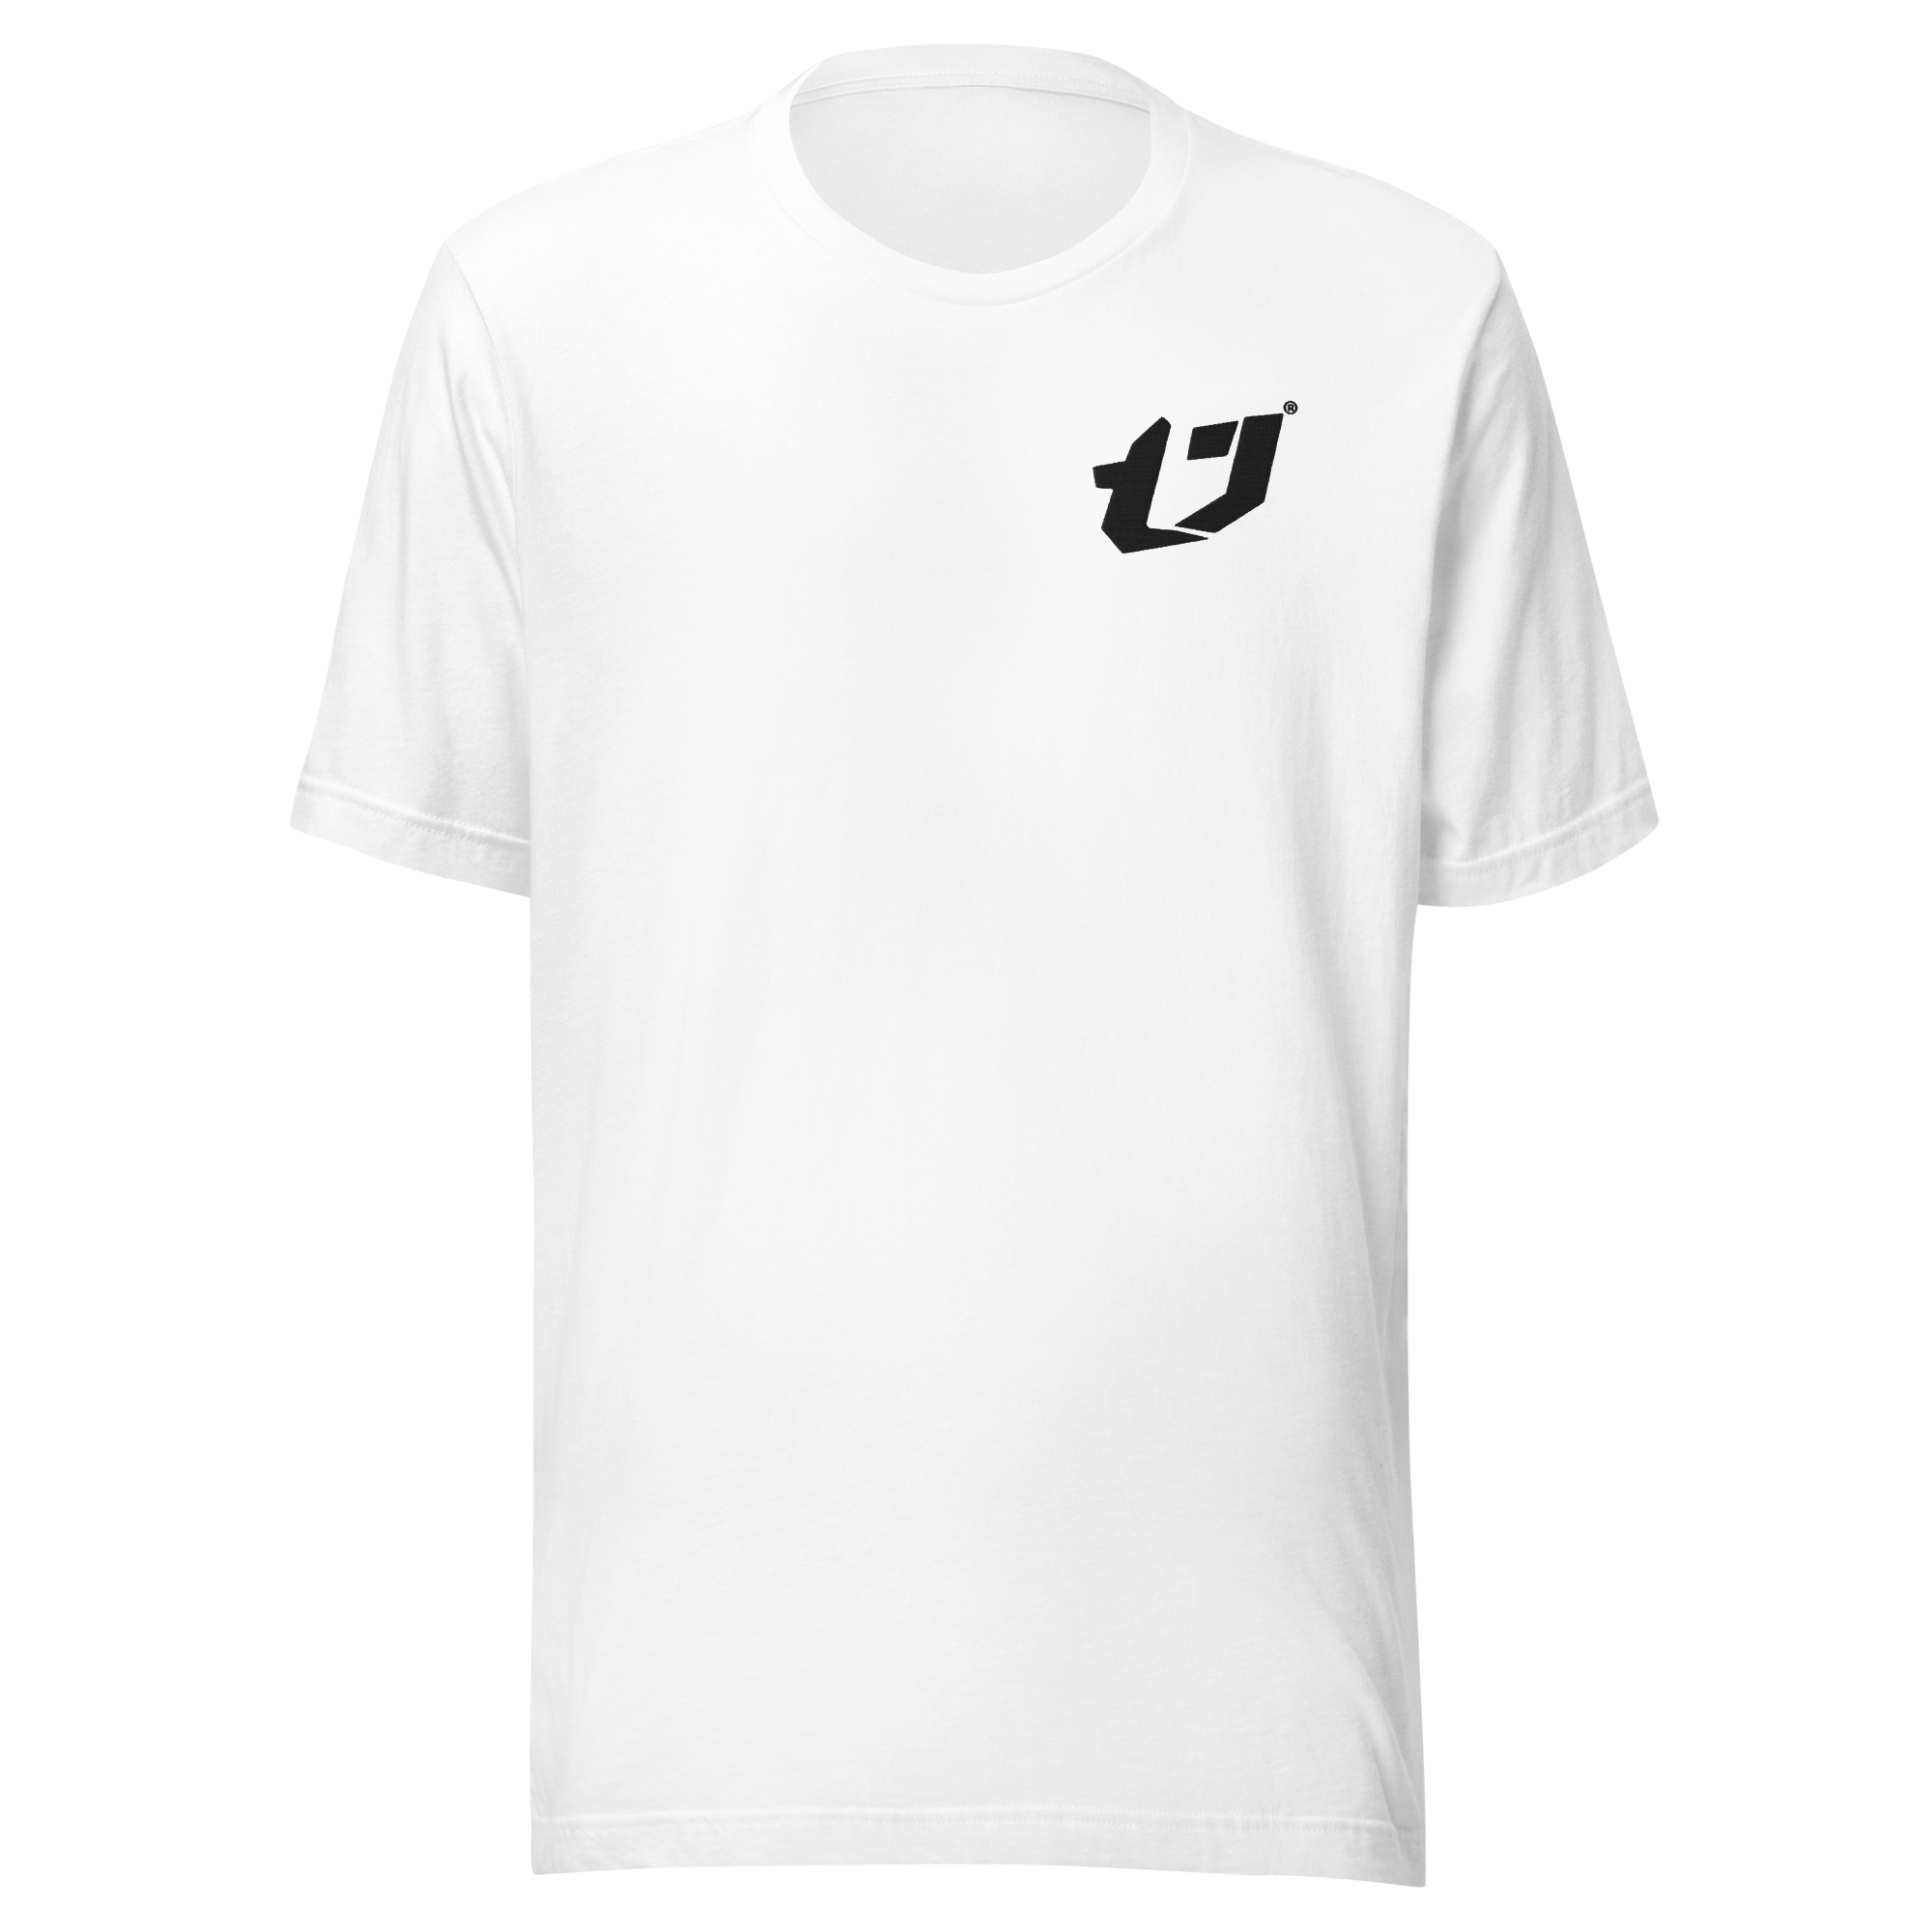 N'Trench Apparel Black Logo Embroidery Unisex t-shirt